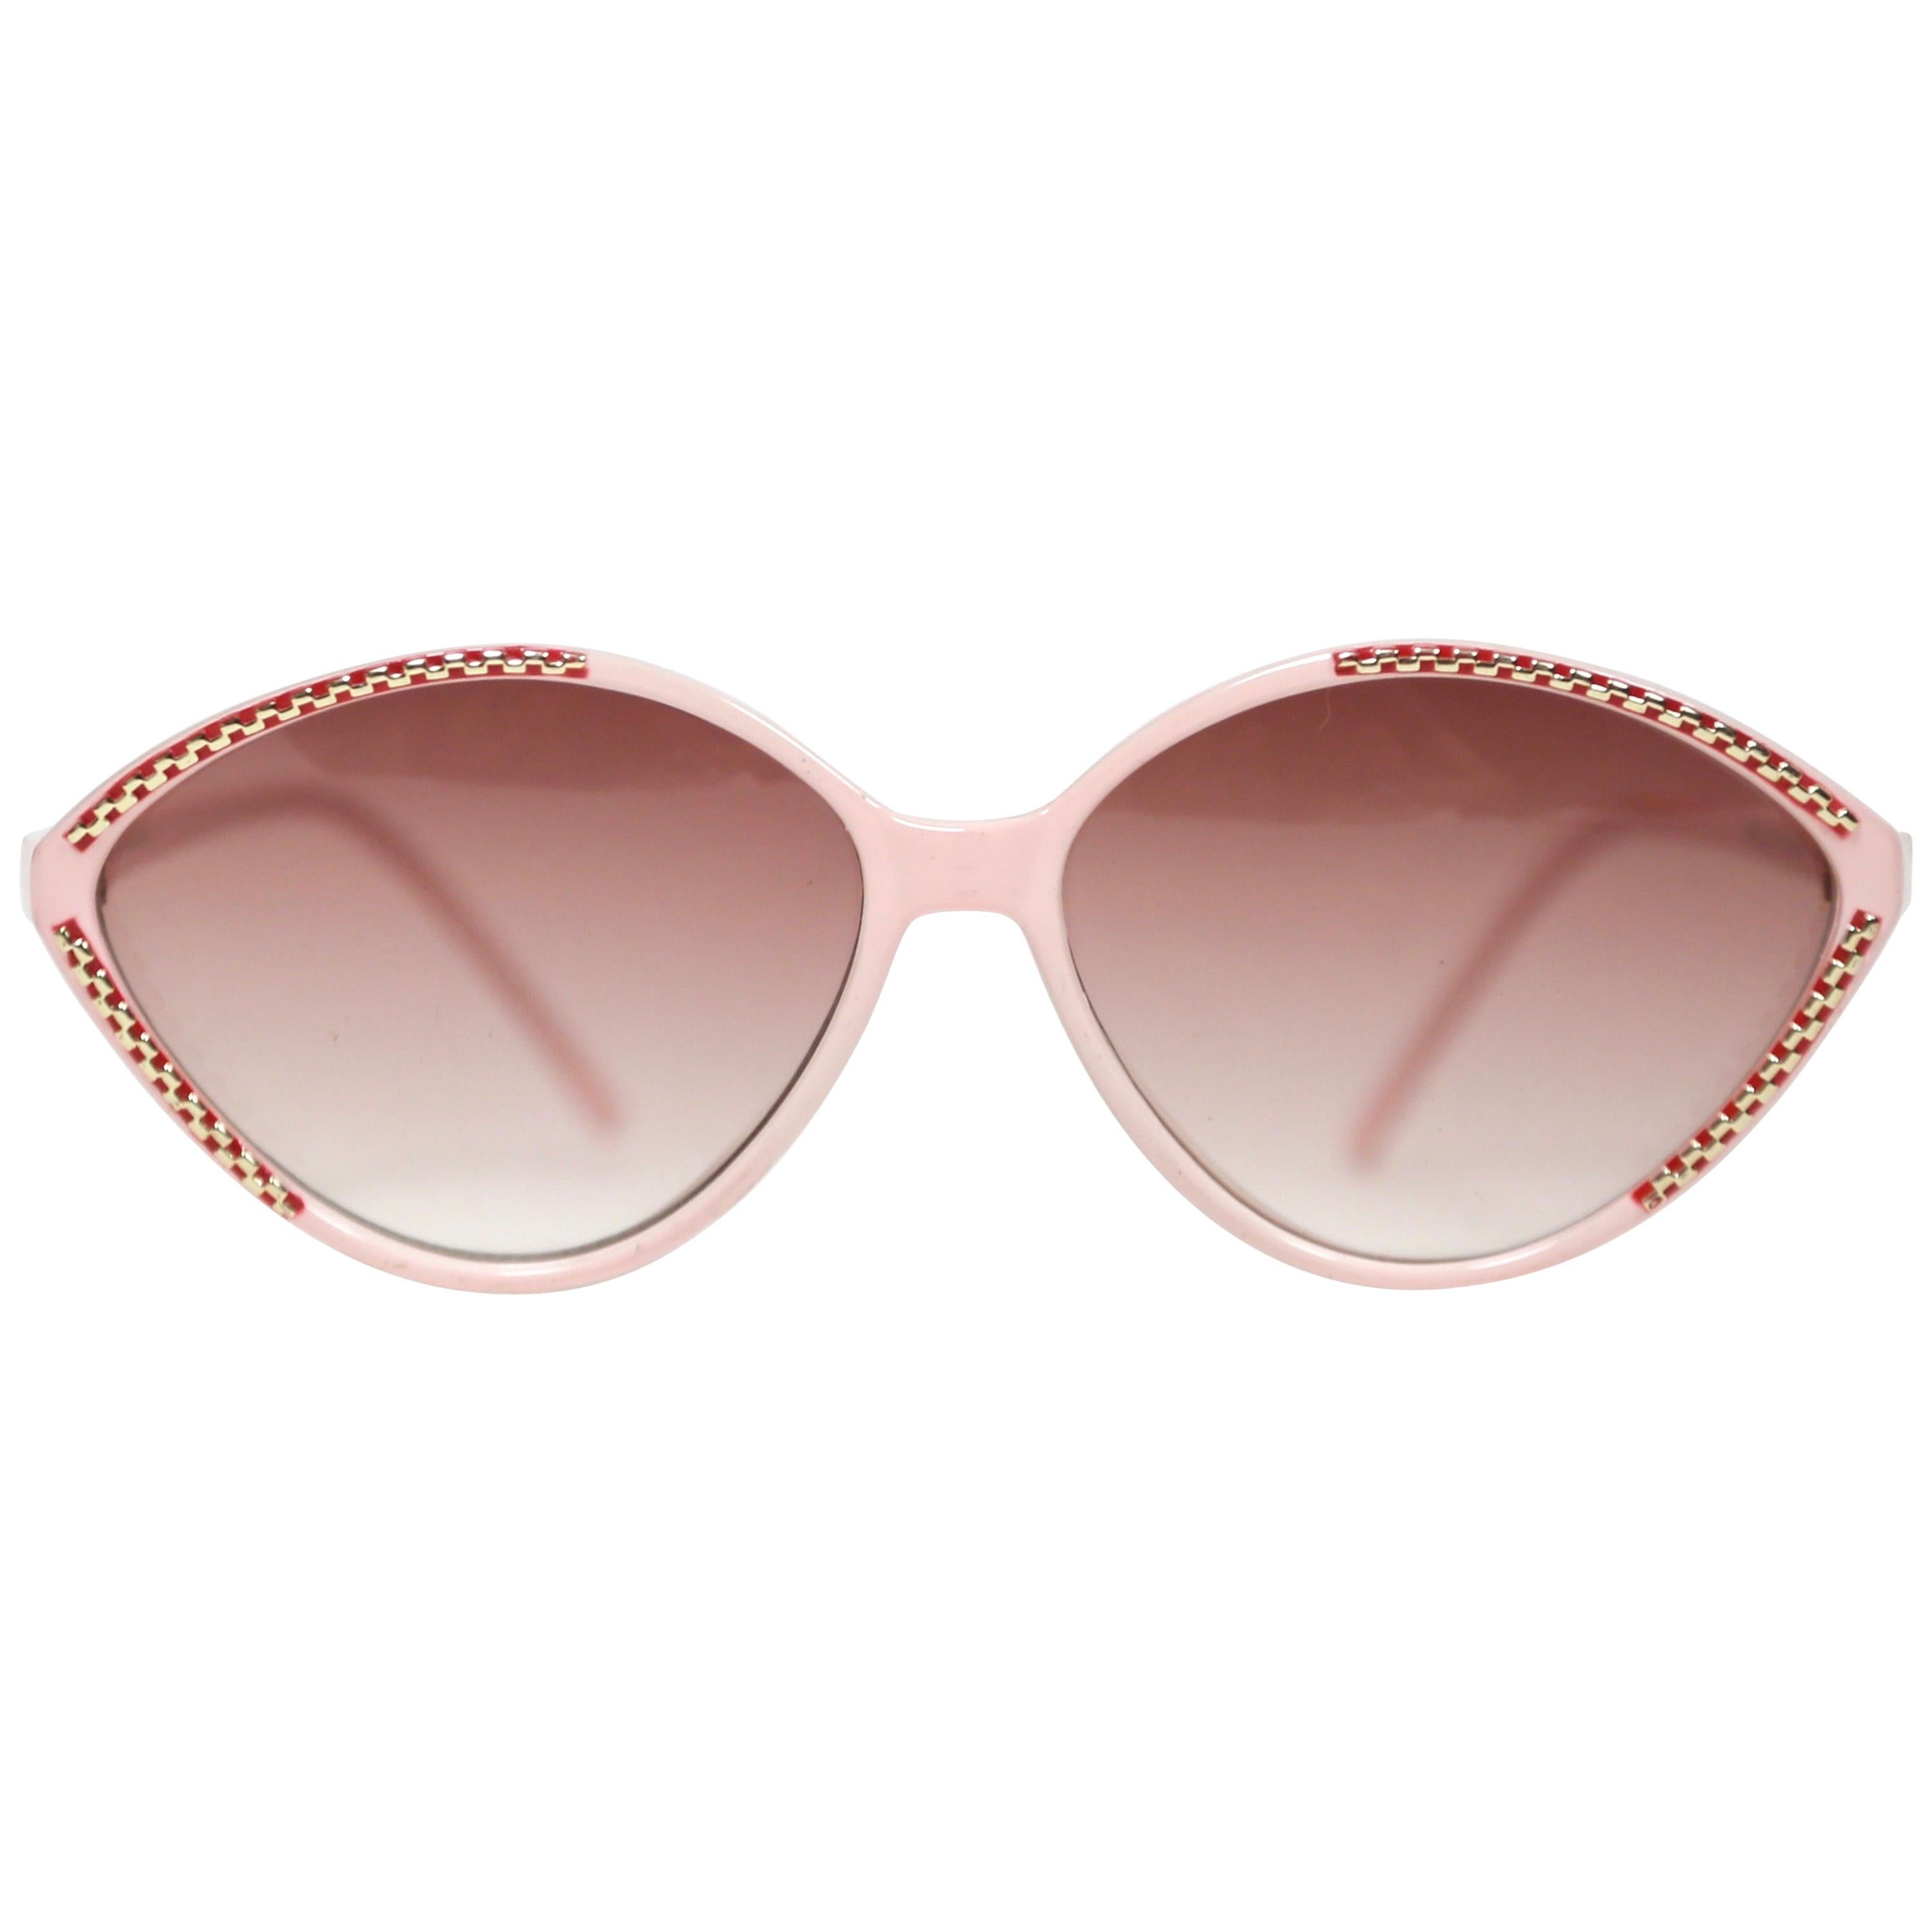 Balenciaga pink and burgundy plastic sunglasses with gold accents, 1980s